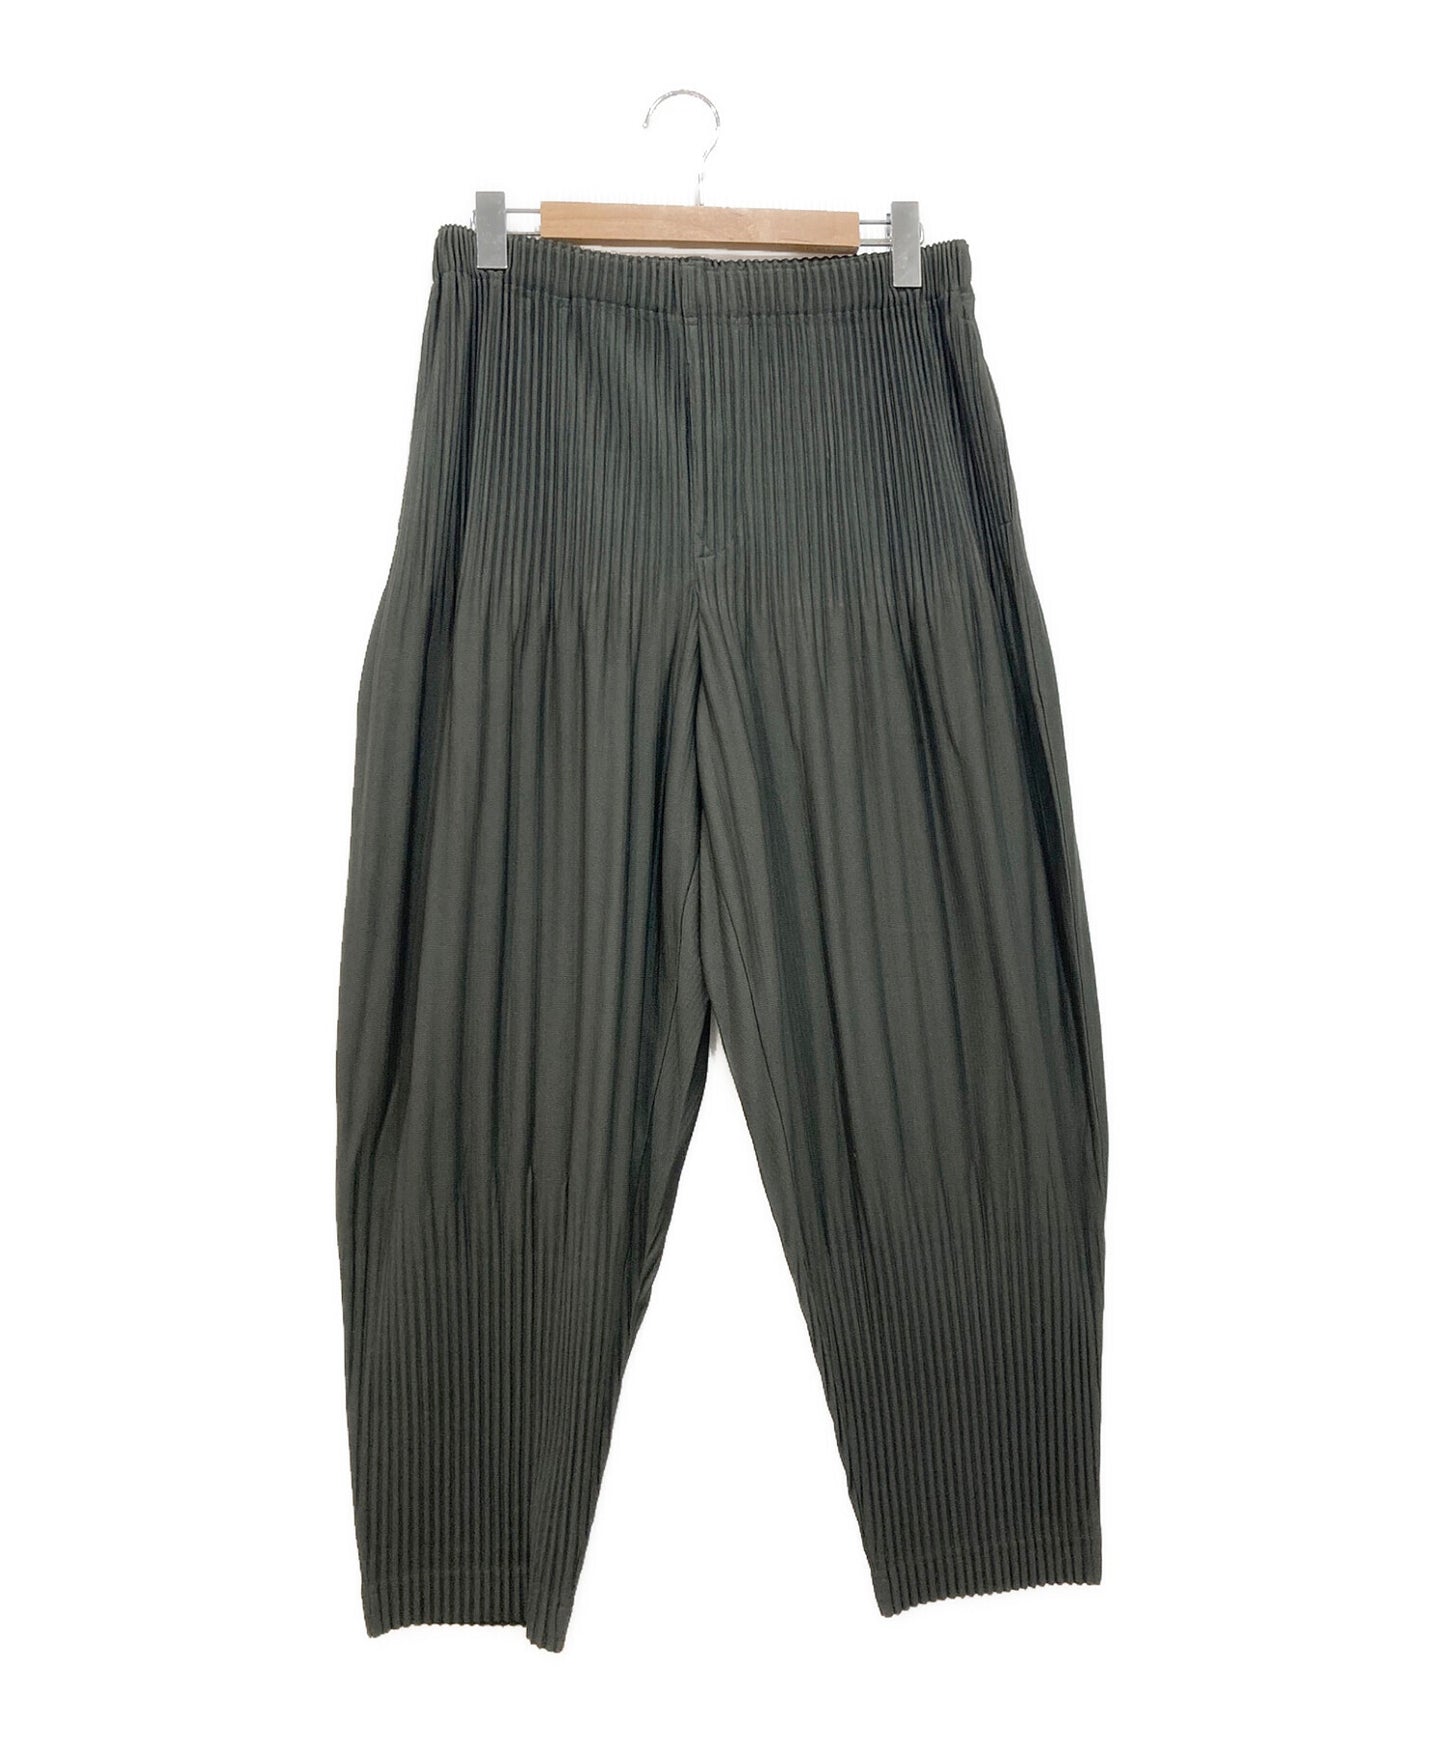 homme plisse issey miyake pleated褲子HP13JF606